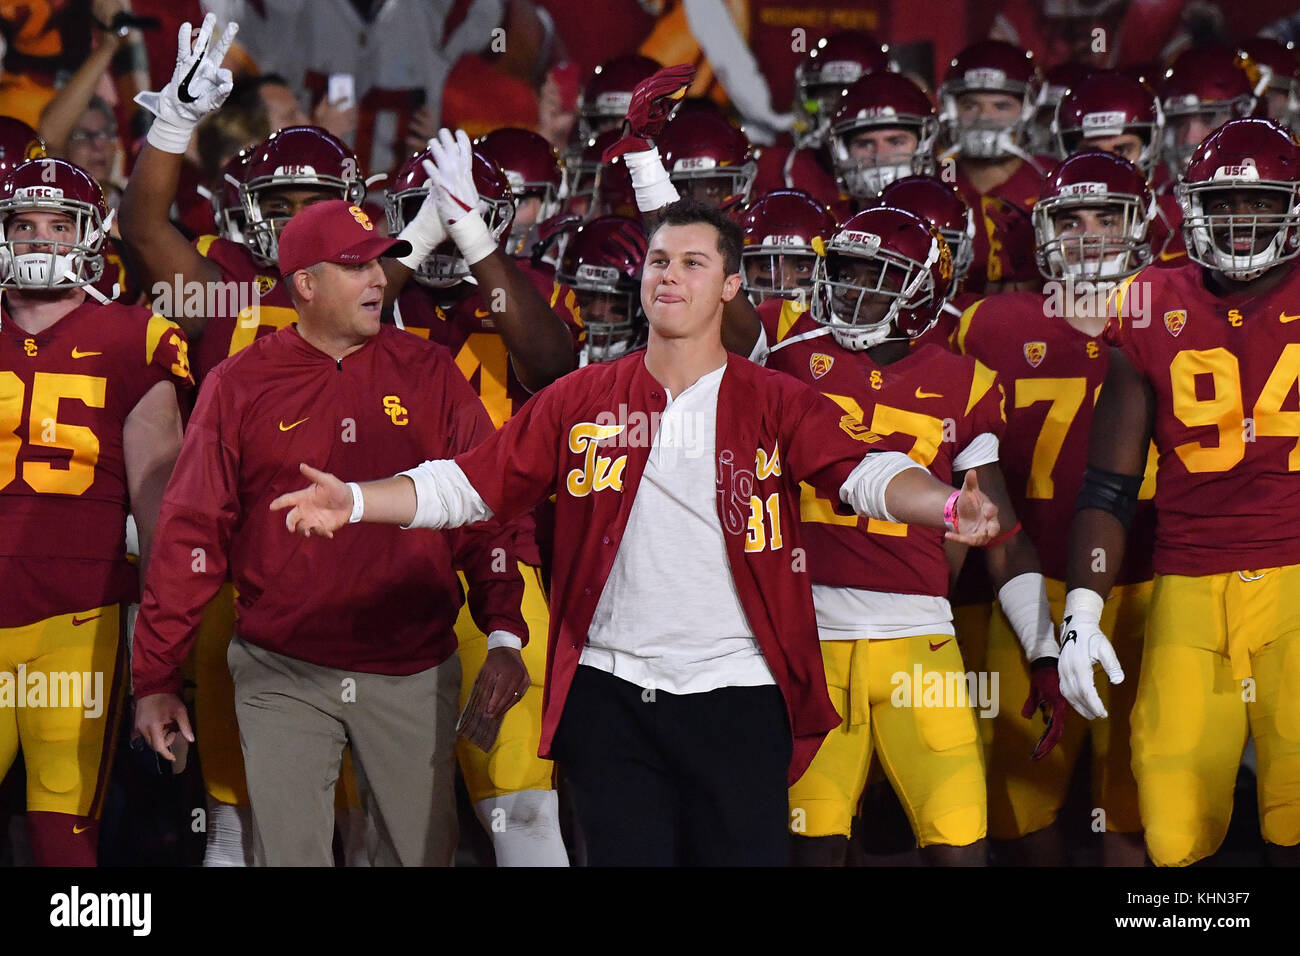 Los Angeles, CA, USA. 18th Nov, 2017. Los Angeles Dodgers Joc Pederson  leads the team on to the field before the NCAA Football game between the  USC Trojans and the UCLA Bruins